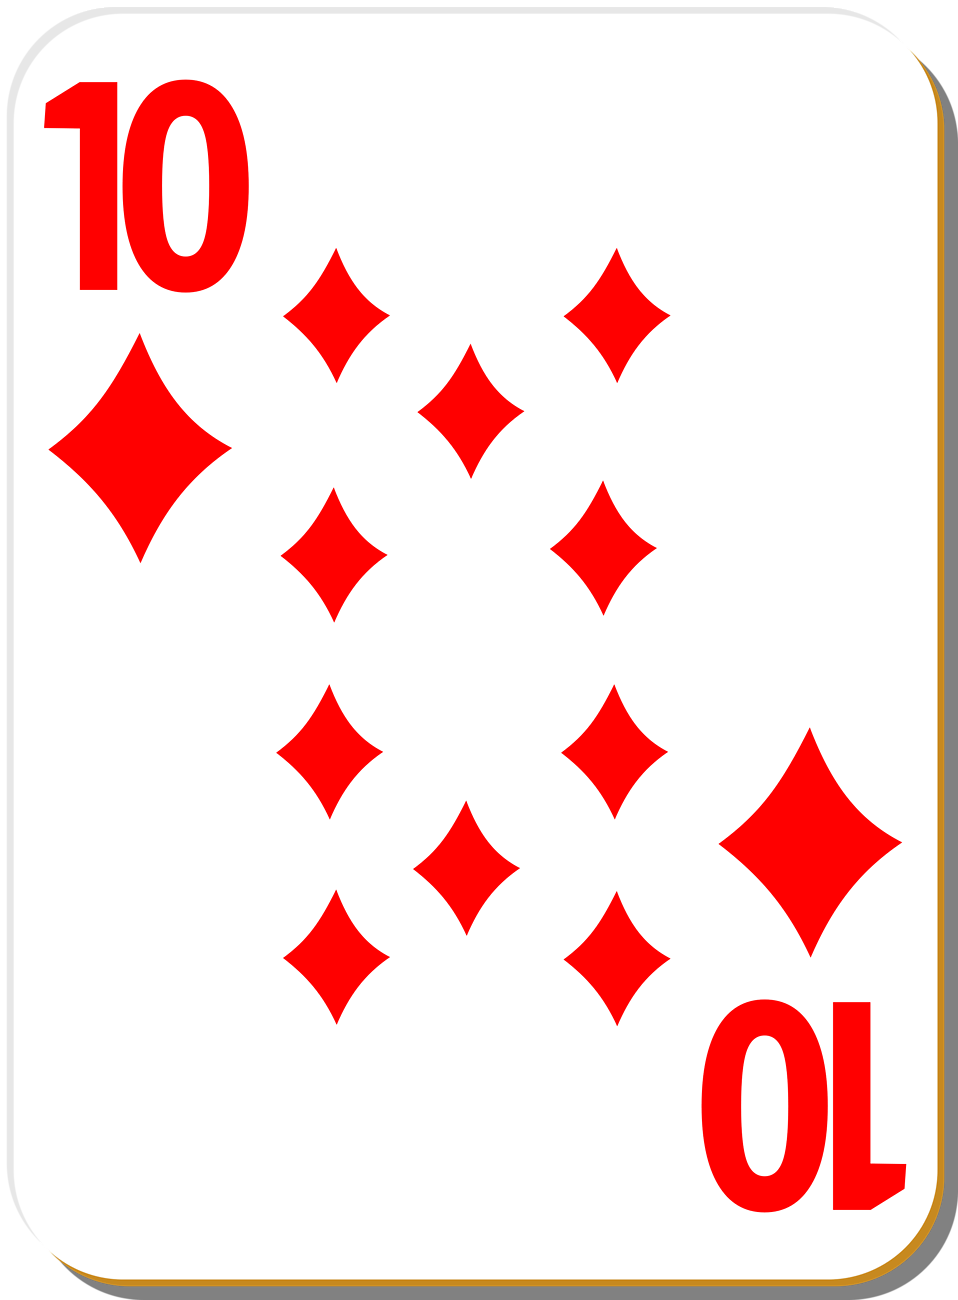 playing card clipart free download - photo #46